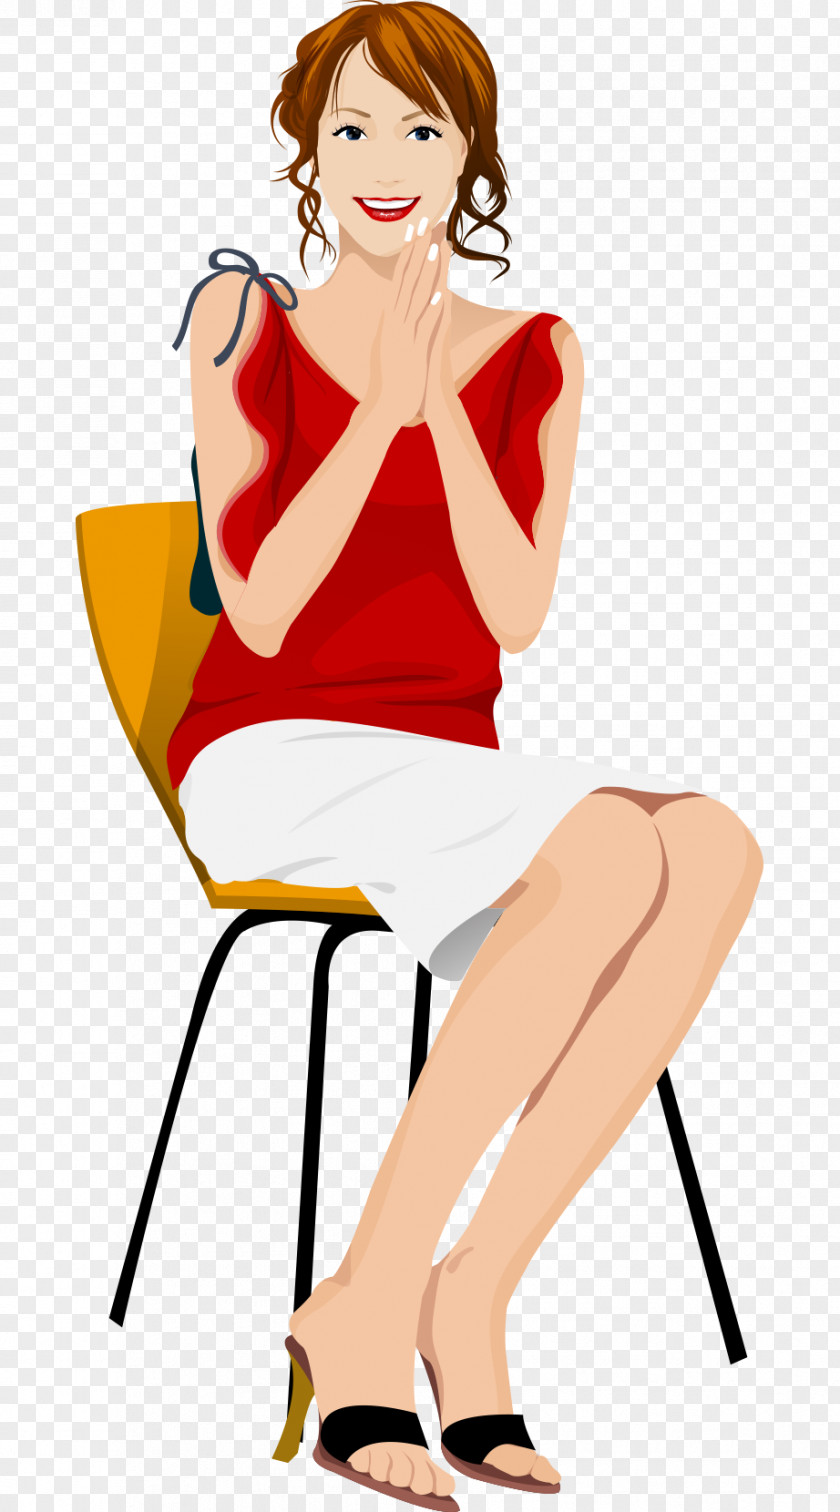 Hand-painted Cartoon Sitting On A Chair Flirty Add Orange / Banners Clip Art PNG